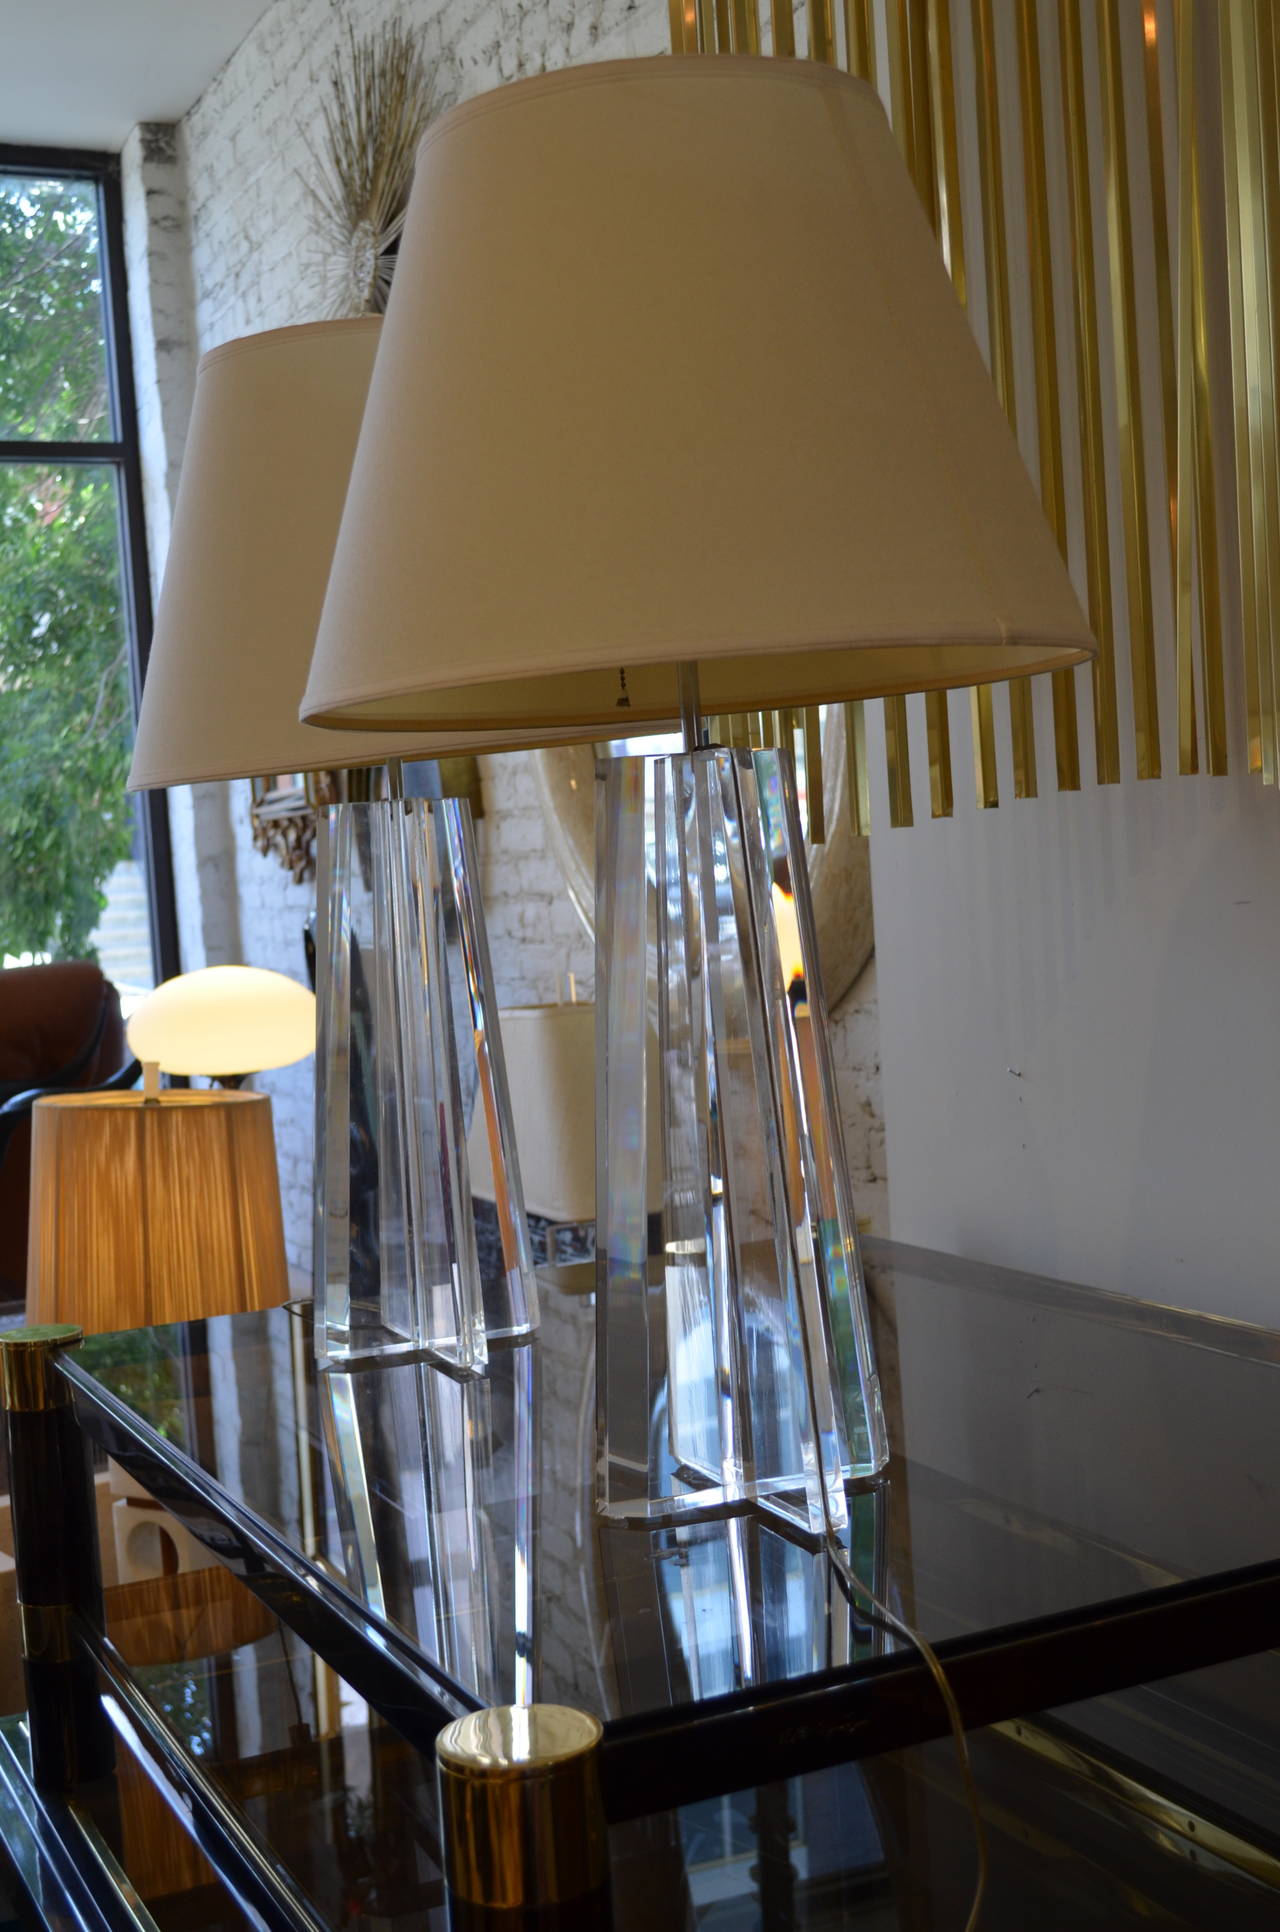 Lucite pair of Les Prismatiques table lamps.
The cord is set into a channel on the side of the lamp.
Chrome-plated hardware. Finest quality.
Shades not included.